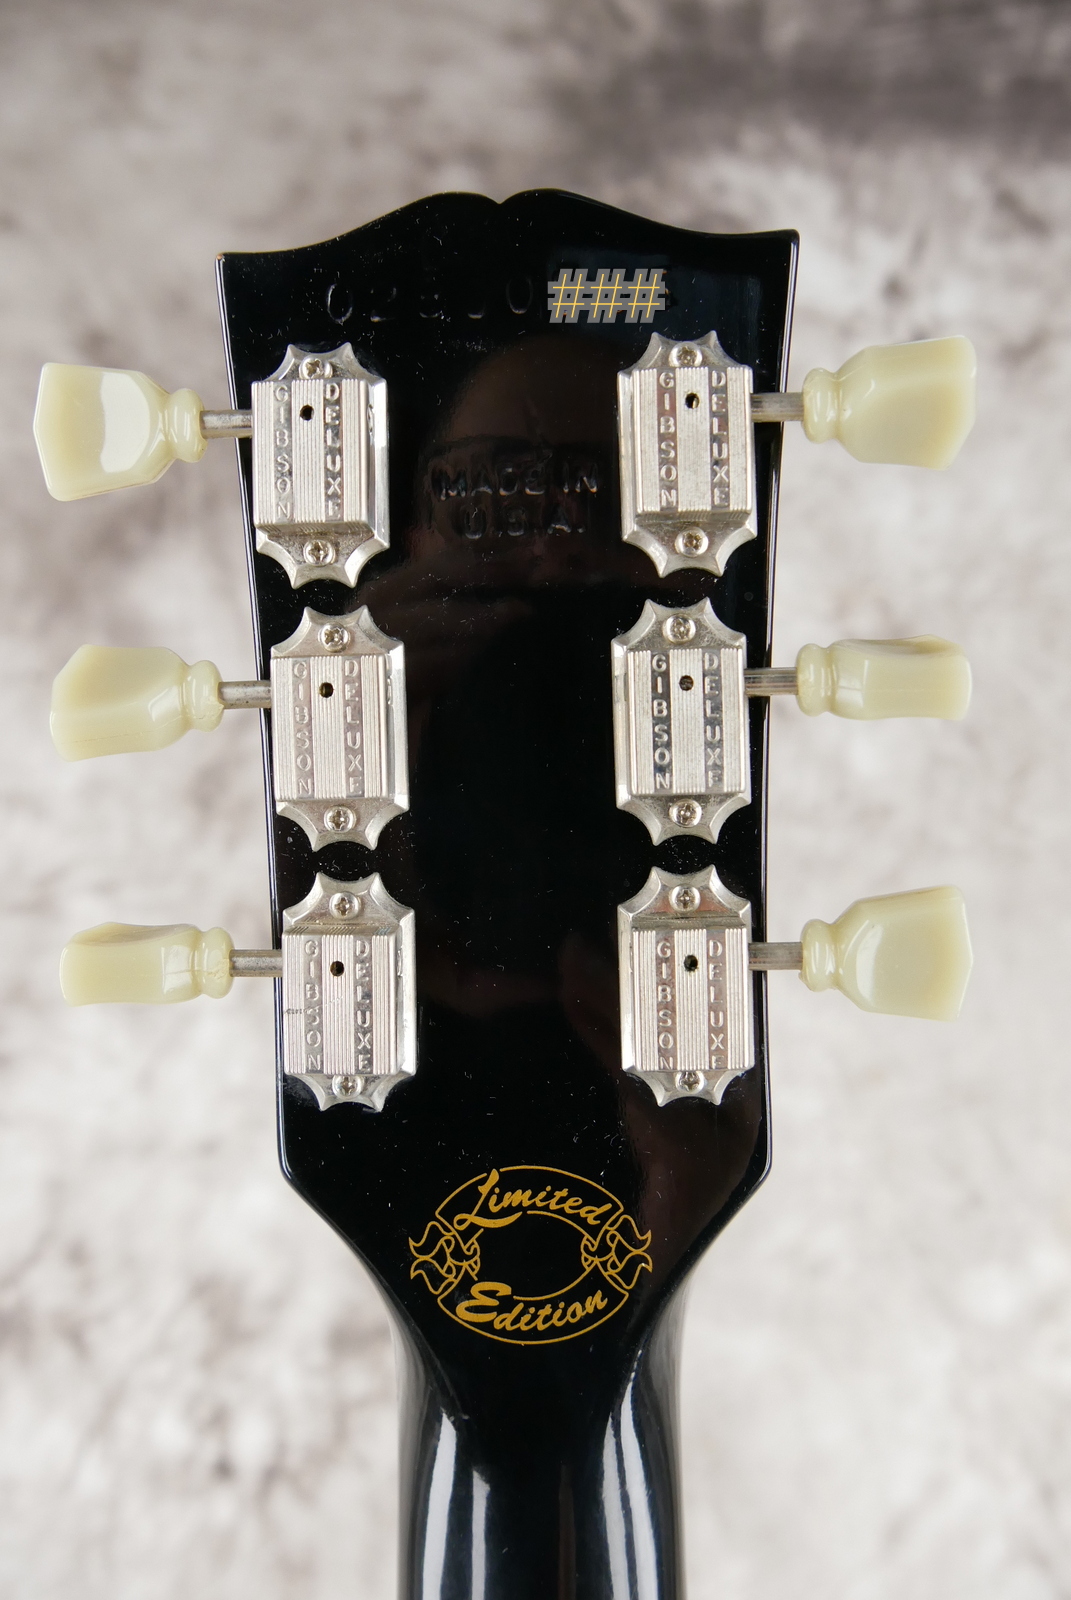 img/vintage/5337/Gibson_Les_Paul_Deluxe_limited_edtion_black_2000-010.JPG